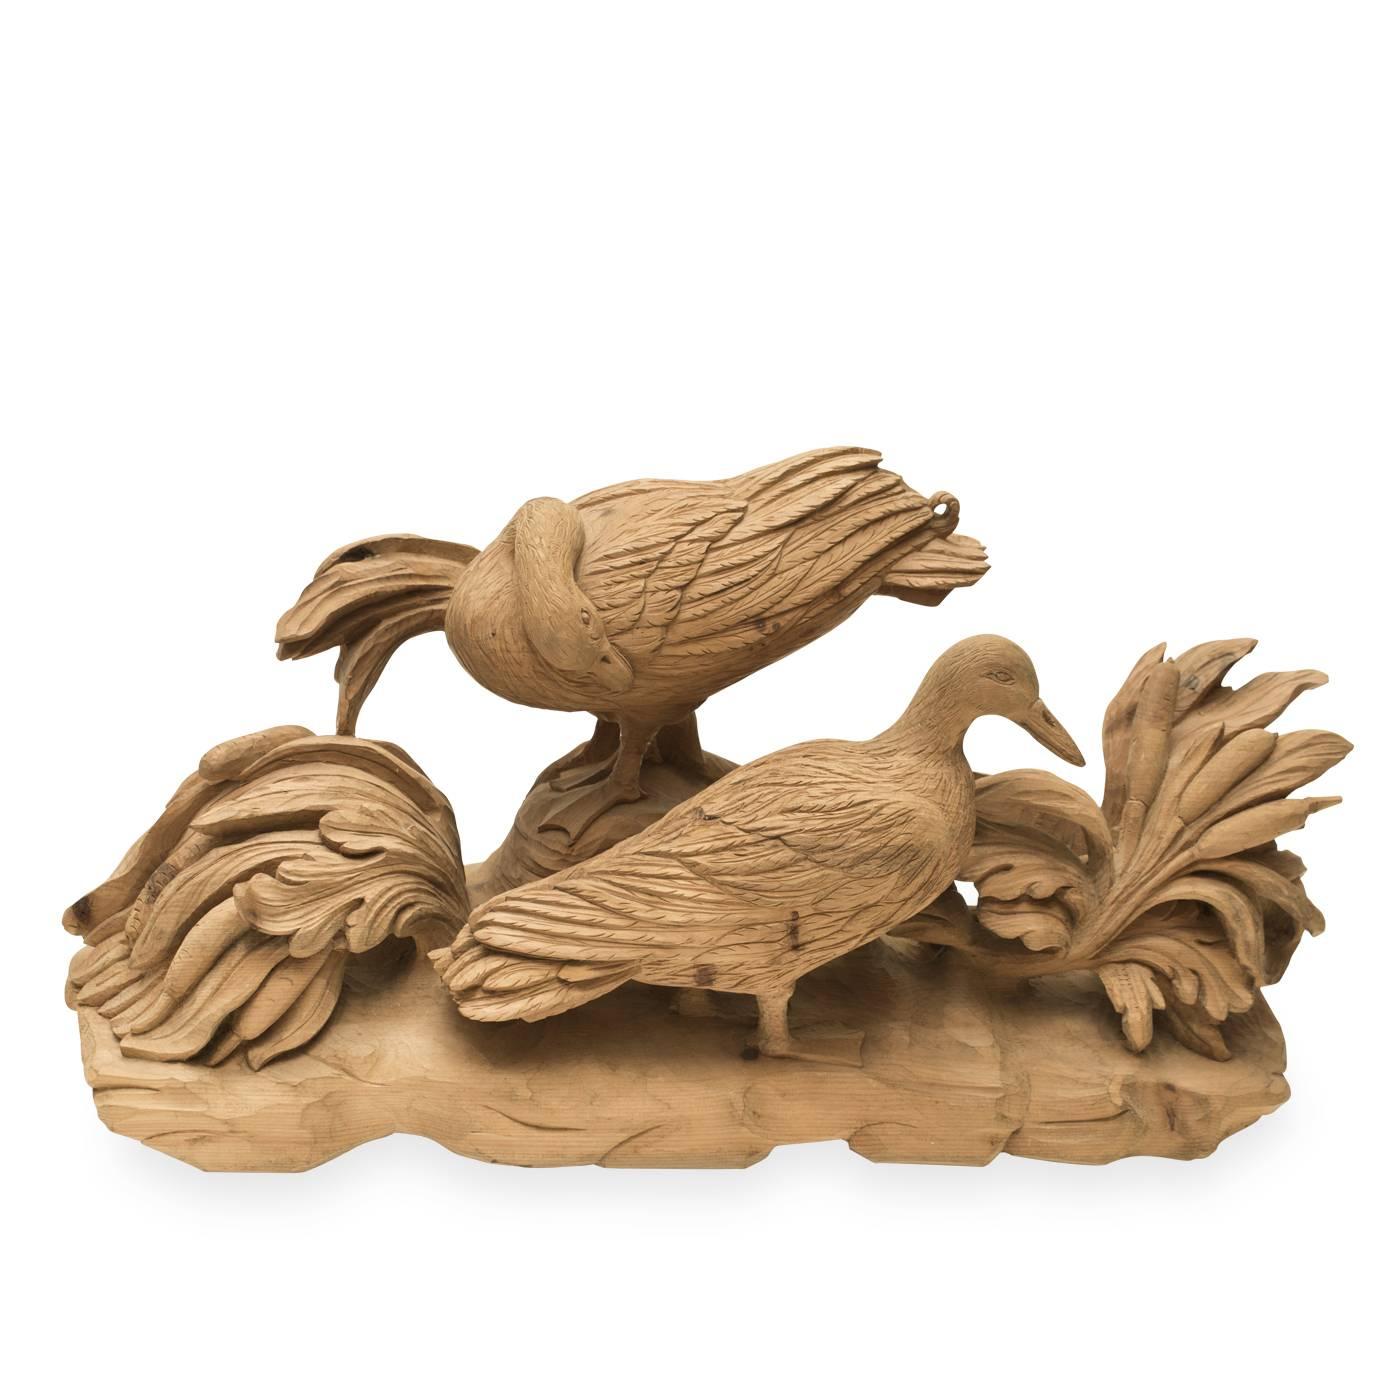 This entirely hand-carved sculpture by Bartolozzi e Maioli exhibits two graceful birds engaged in a natural environment. The unique piece, in Austrian pine, was originally designed for an architecture studio in the 1980s.